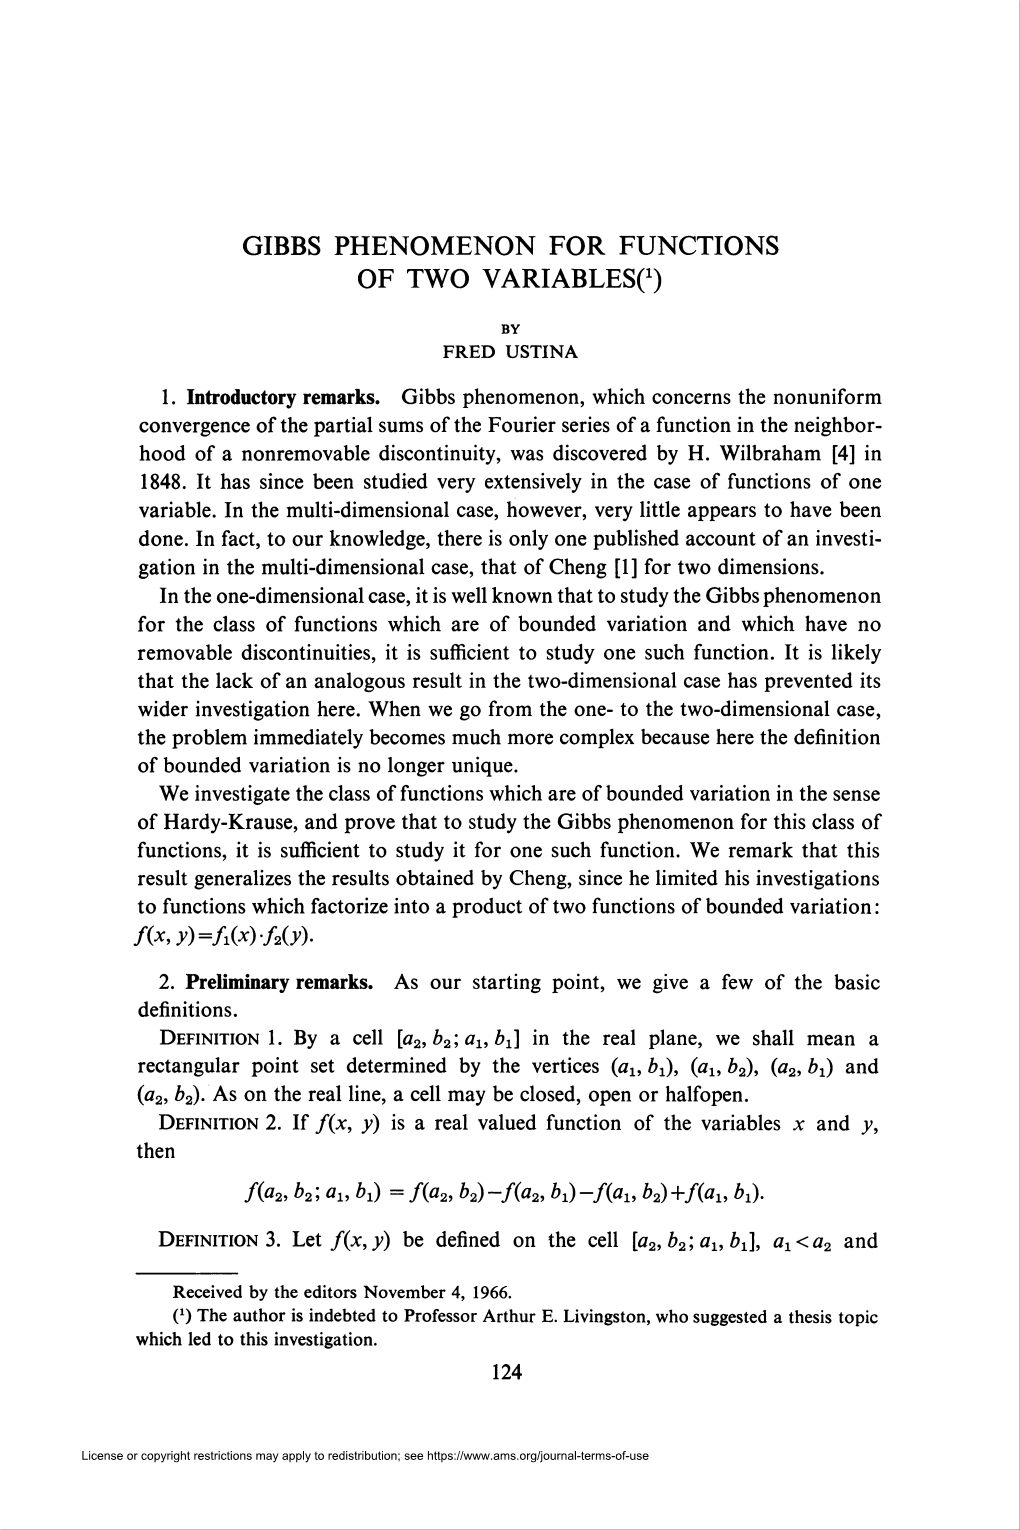 Gibbs Phenomenon for Functions of Two Variableso)